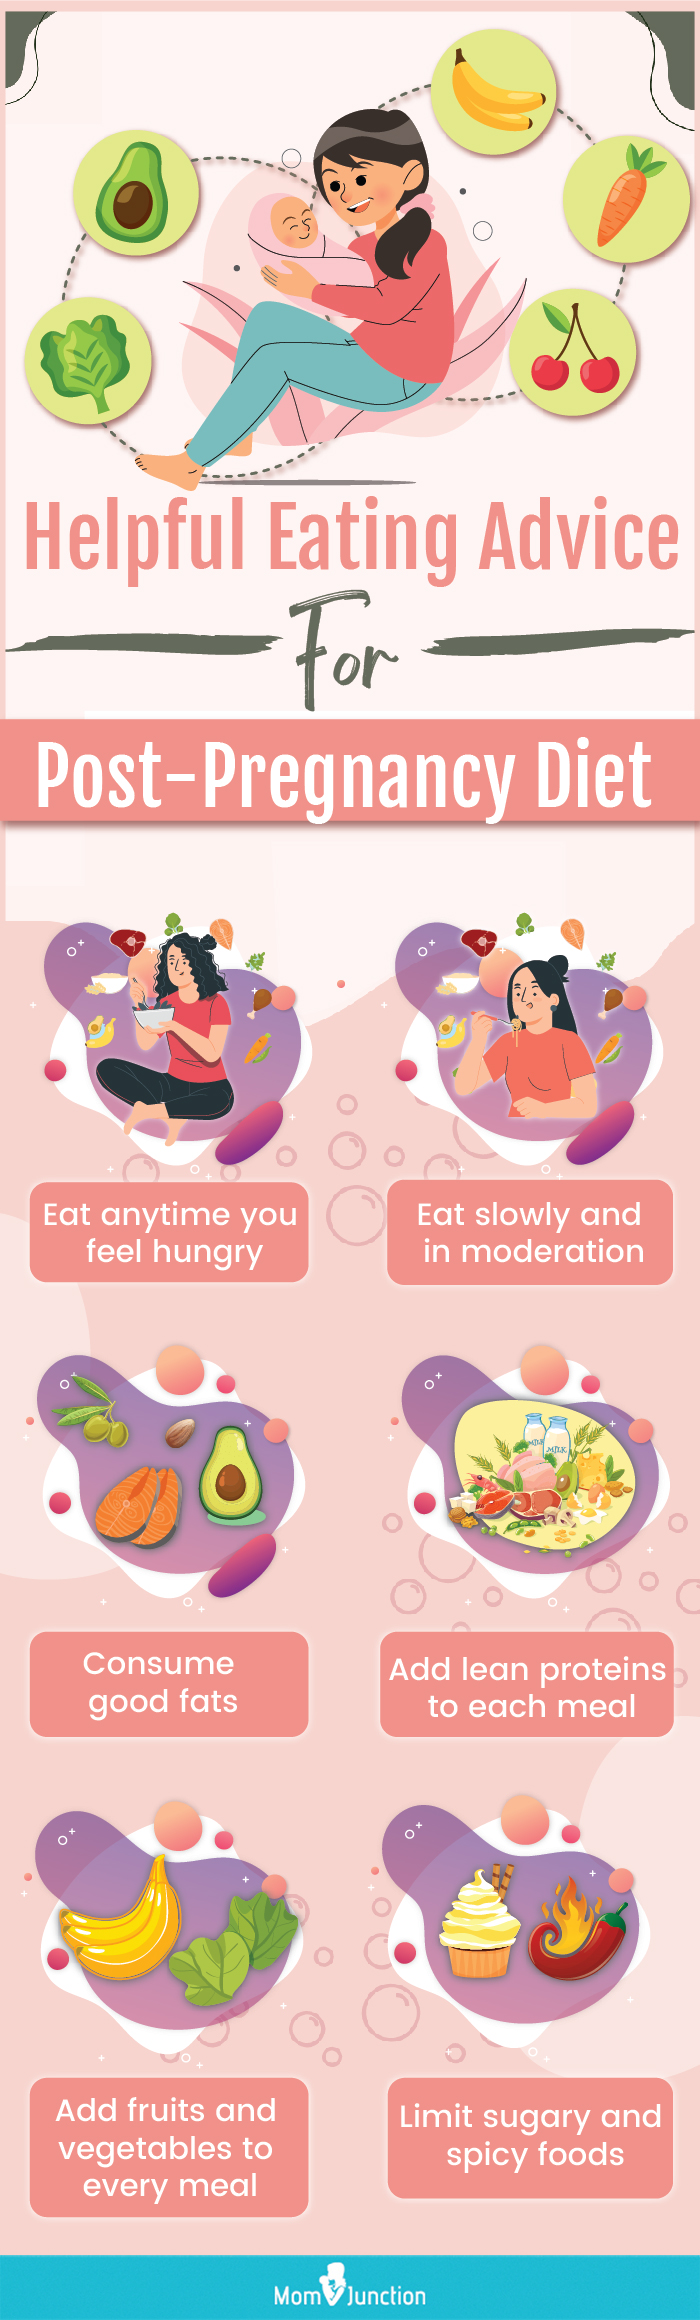 eating advice for post pregnancy diet (infographic)